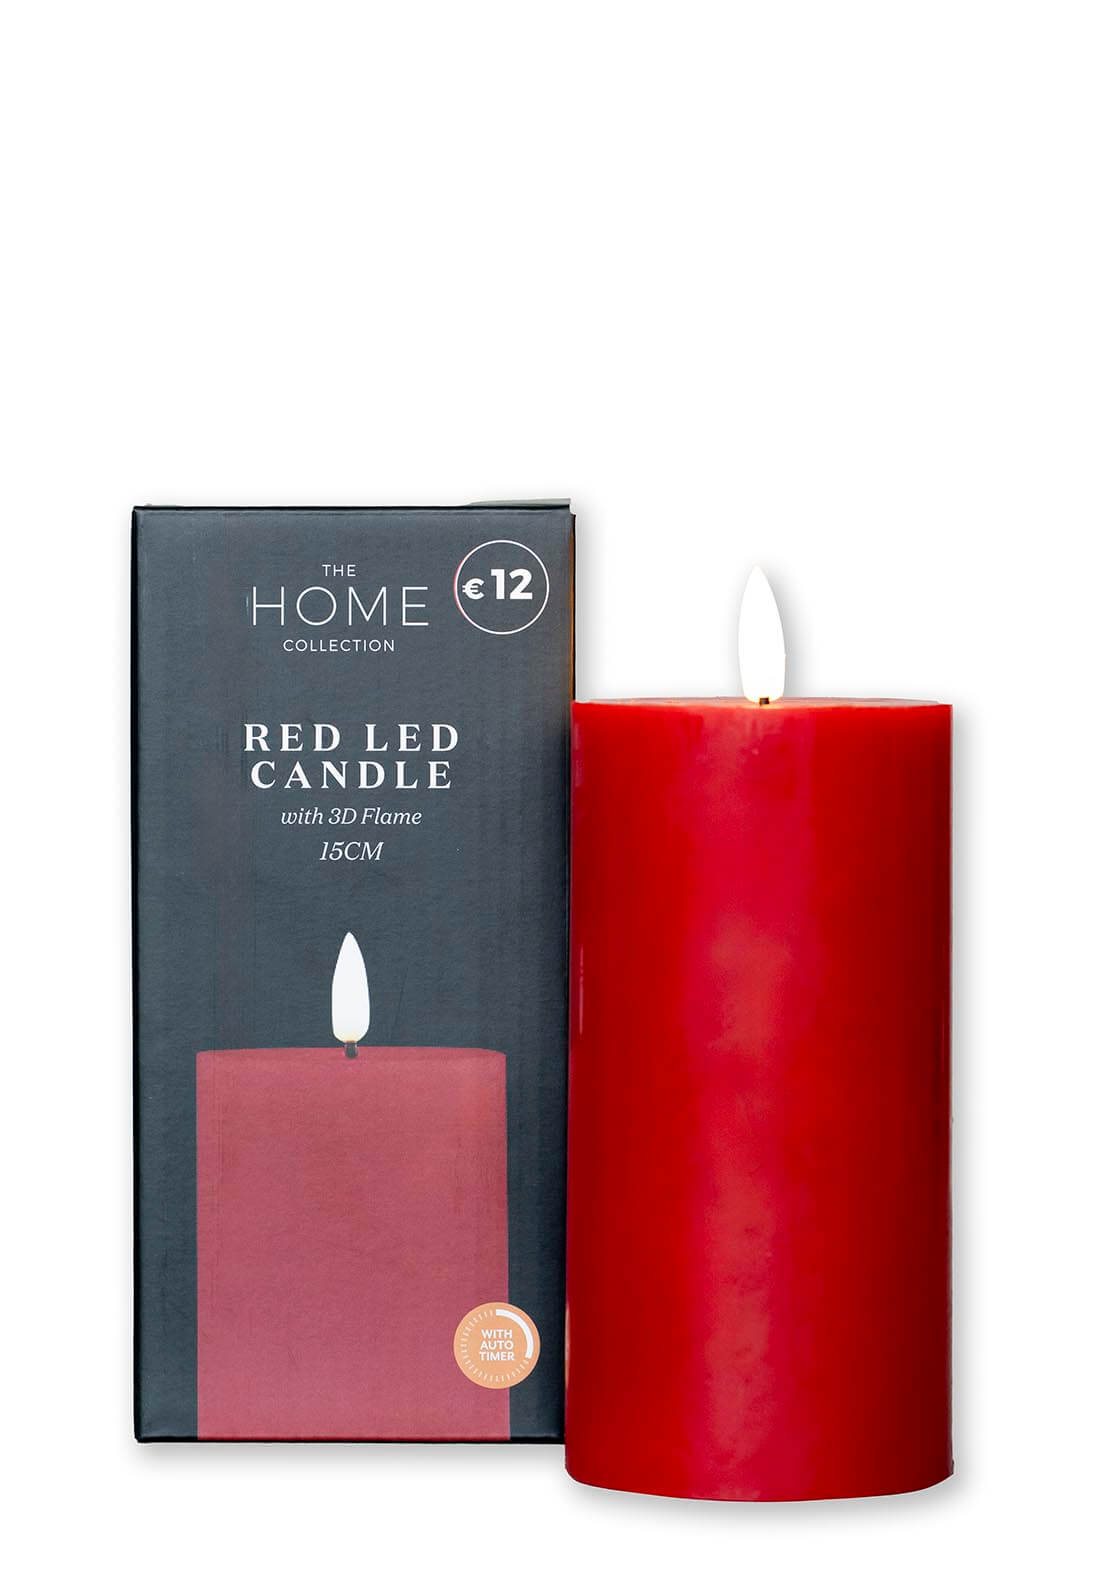 The Home Collection 3D-Flame LED Candle 15cm With 6 Hour Timer - Red 1 Shaws Department Stores